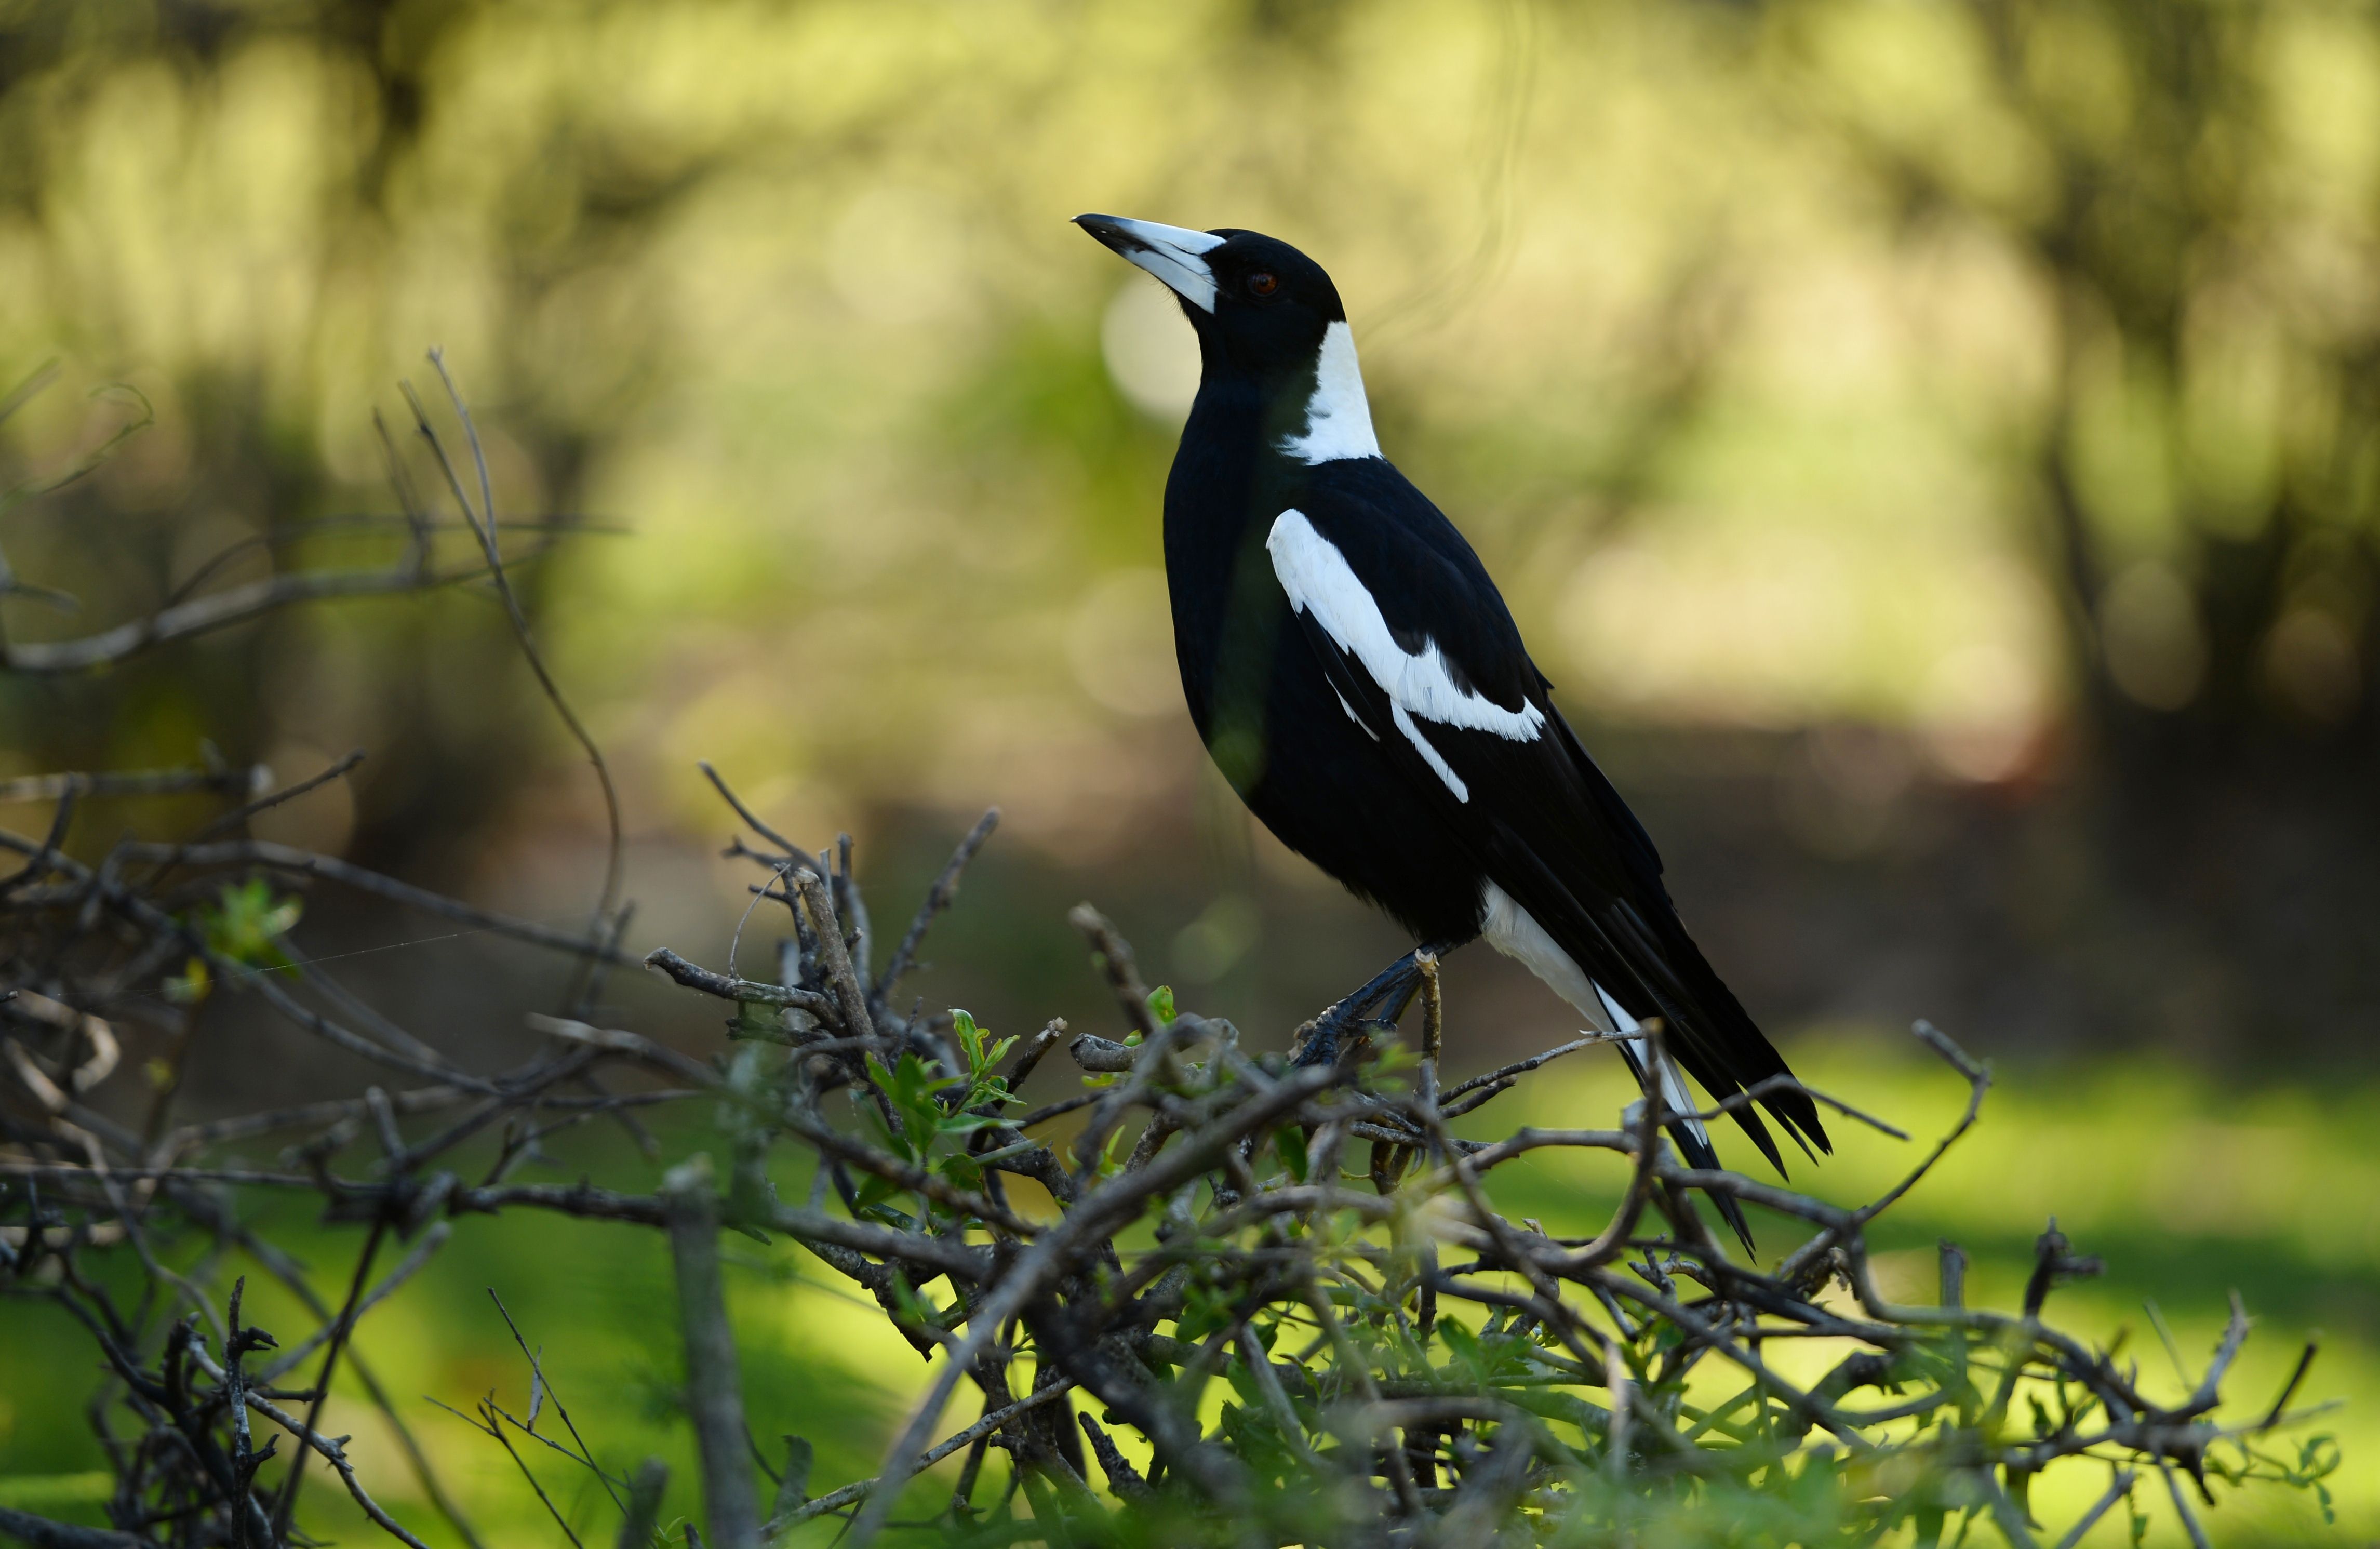 This file photo taken on October 9, 2014 shows a magpie sitting on a hedge in Sydney. Populations of some of Australia's iconic birds -- including the laughing kookaburra, magpie and willie wagtail -- are in decline in parts of the country, according to a report released on July 15, 2015 with habitat loss, feral cats and foxes among the likely threats. Photo: AFP